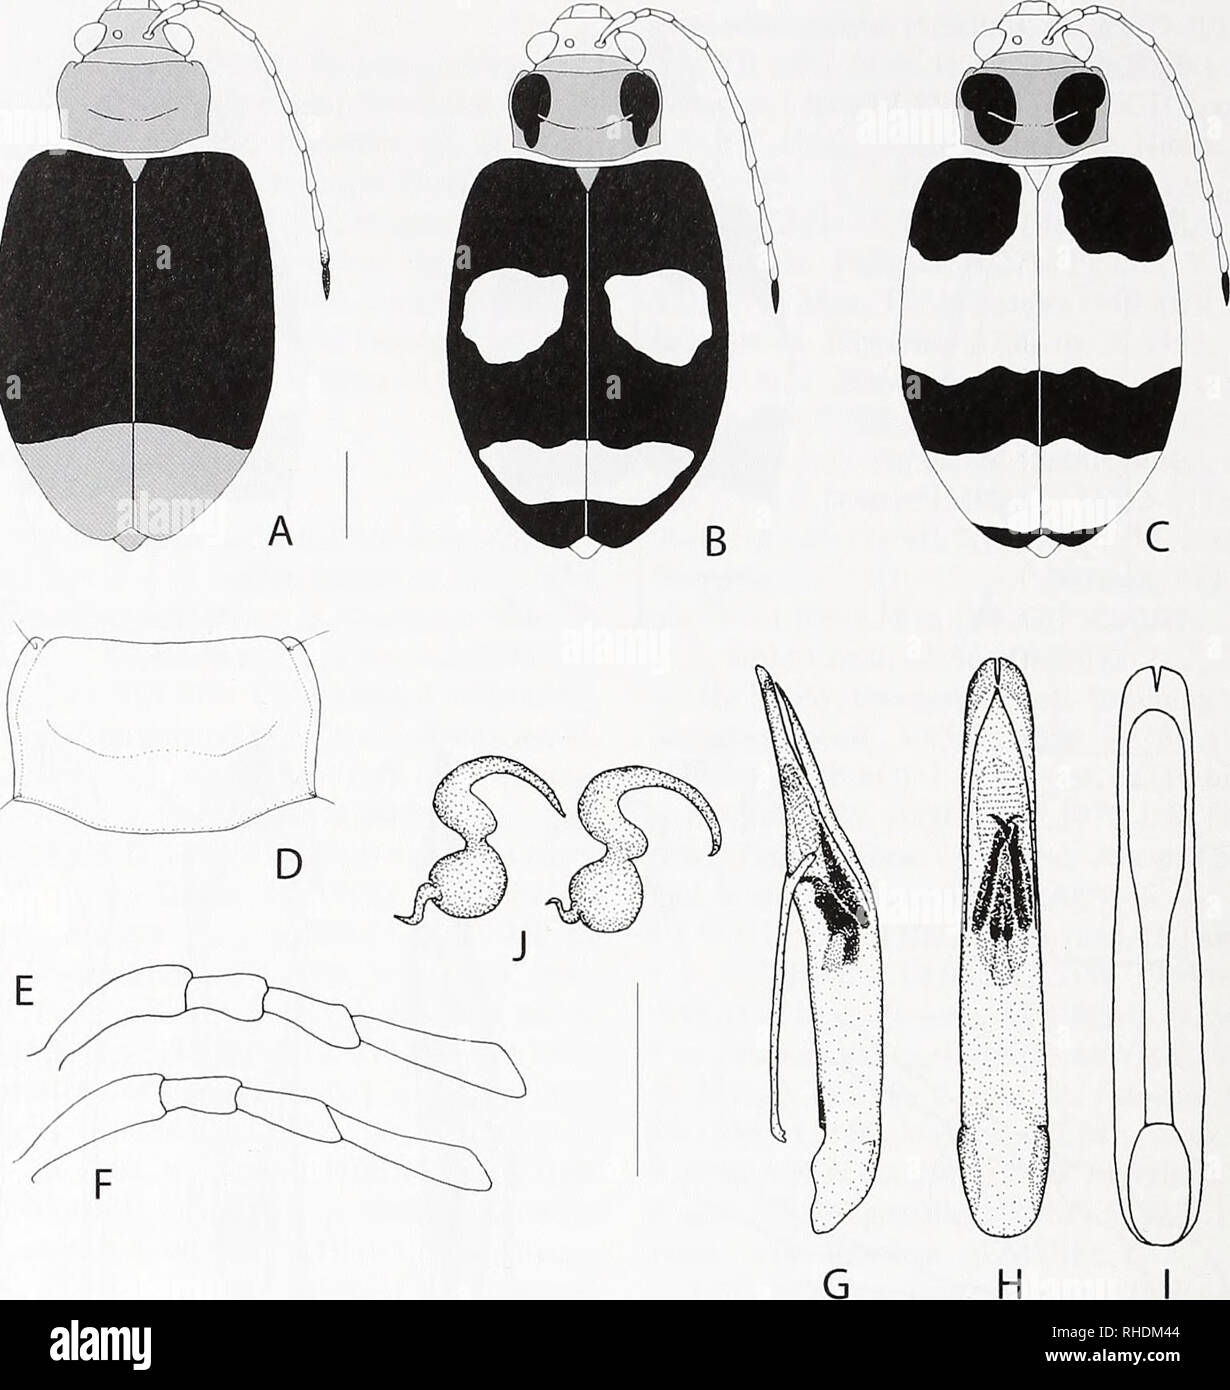 . Bonn zoological bulletin. Zoology. Fig. 9. Morphology of Monoleptoides sulcata (Laboissiere, 1940). a-c. Habitus showing typical colour variation, d. Pronotum, detail, e, f. Basal antennomeres one to four of male (e) and female (f). g-i. Median lobe, lateral (g), dorsal (h), and ventral, with- out endophallic structures (i). j. Spennathecae of two different females. Scale bars: 1 mm. 1 9, 1 6^, Buamba Forest, 0.45N/30.02E, Semliki Valley, XI. 1907, S. A. Neave (BMNH); 2 2 9, Budongo Fo- rest, 1.45N/31.35E, 1200 m, XII. 1911, S. A. Neave (BMNH); 1 Kampala, 0.19N/32.35E, XI.-XII.1920, S. A. Ne Stock Photo